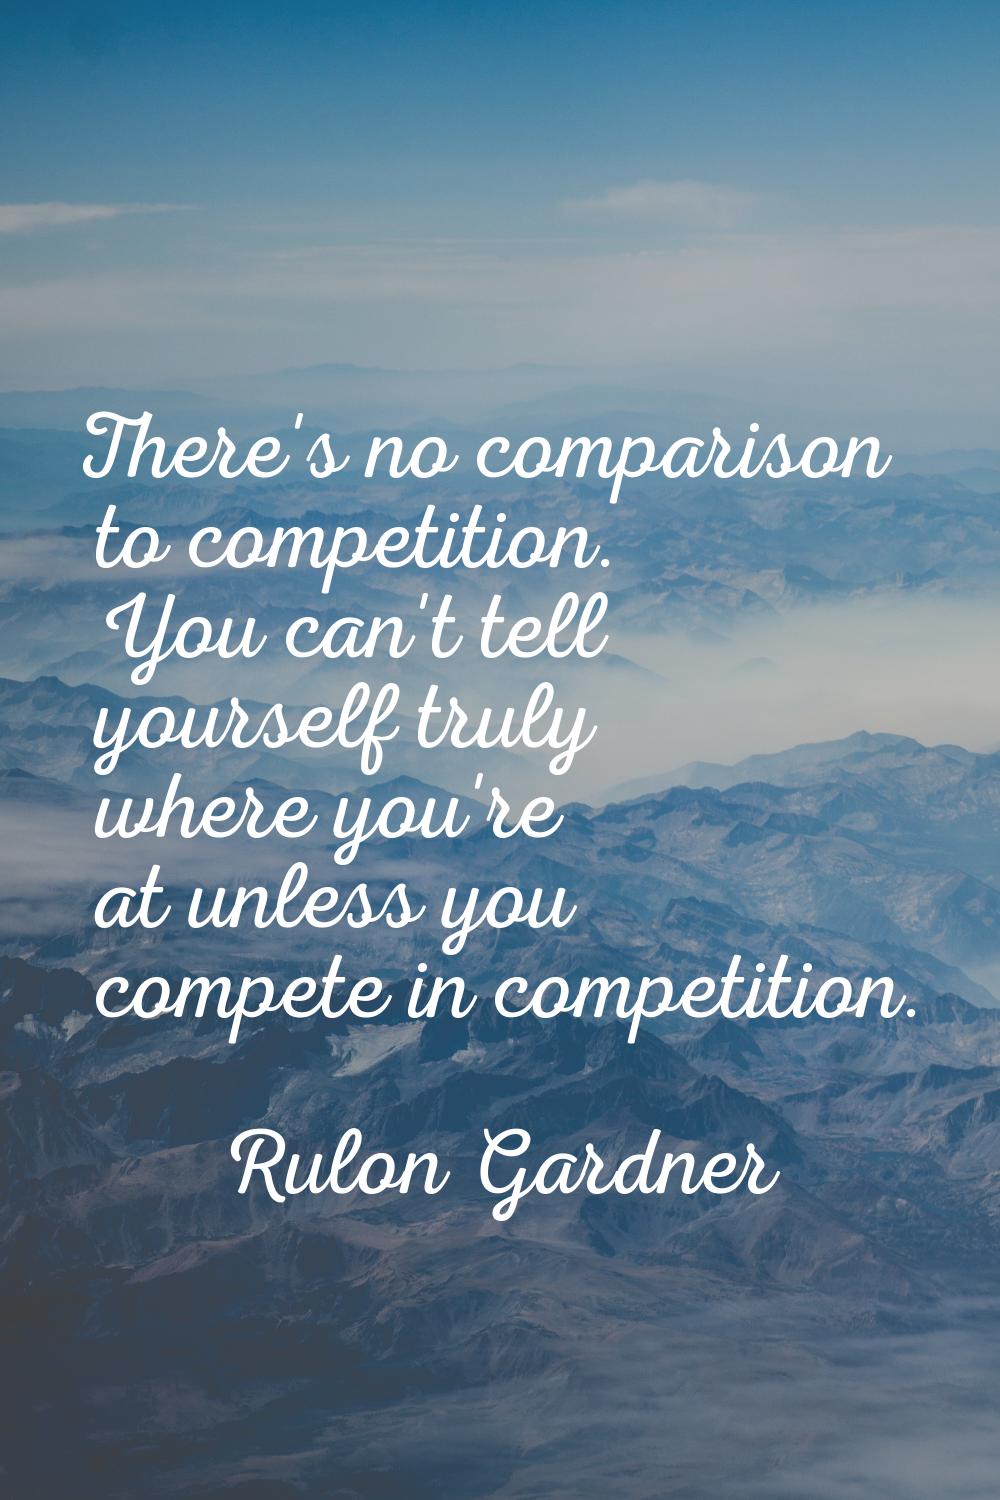 There's no comparison to competition. You can't tell yourself truly where you're at unless you comp